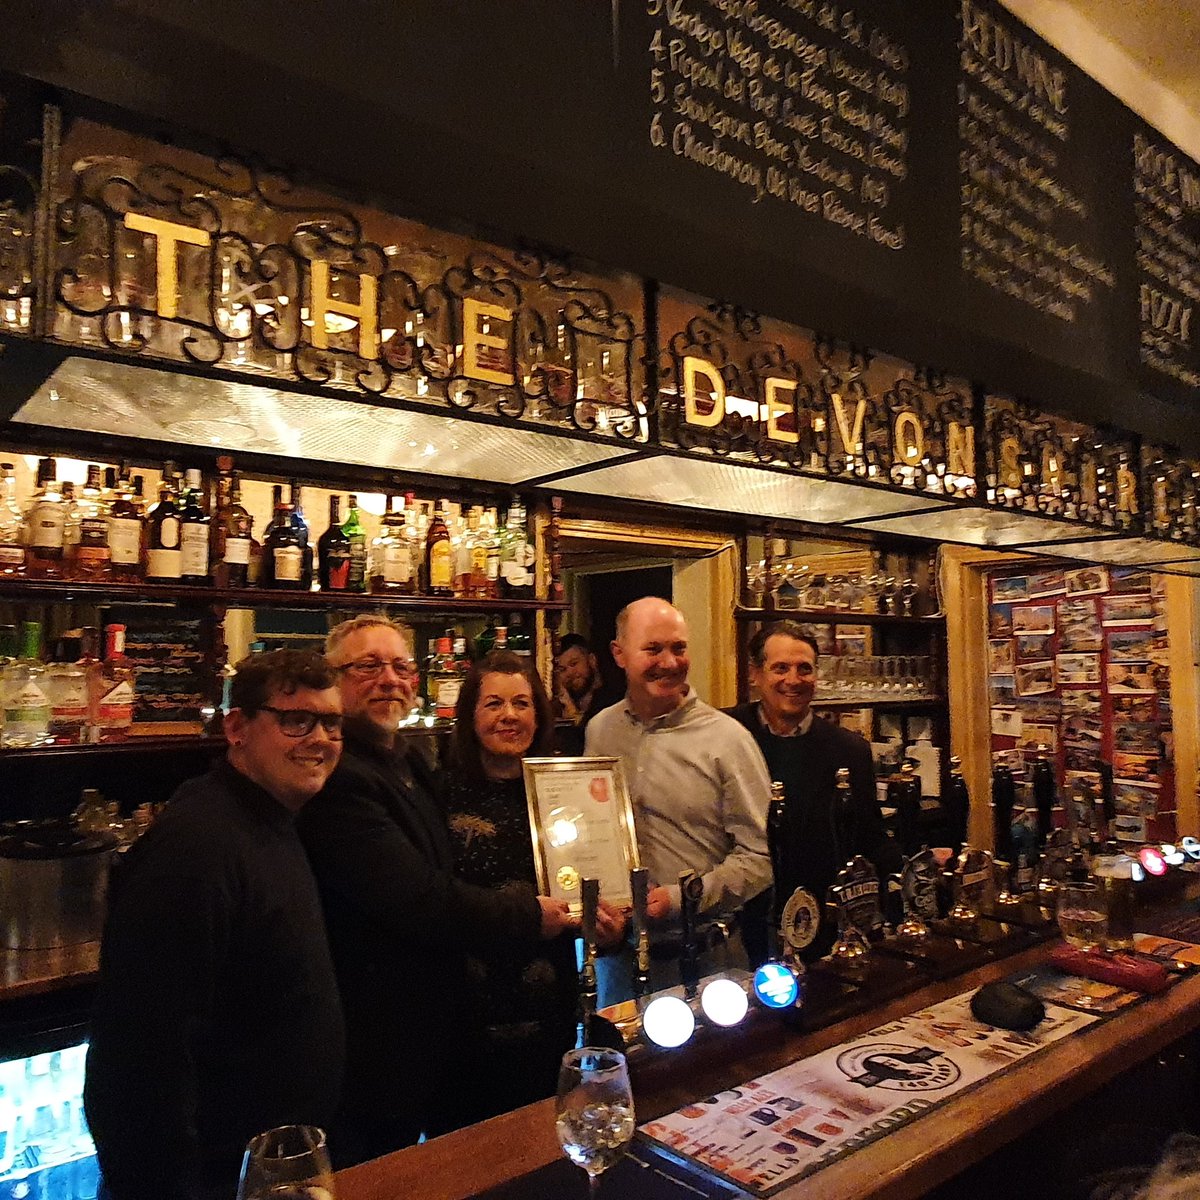 Congratulations to The Devonshire Arms, Bedford for becoming our Pub of the Year 2020. #bedford #camra #beer #poty